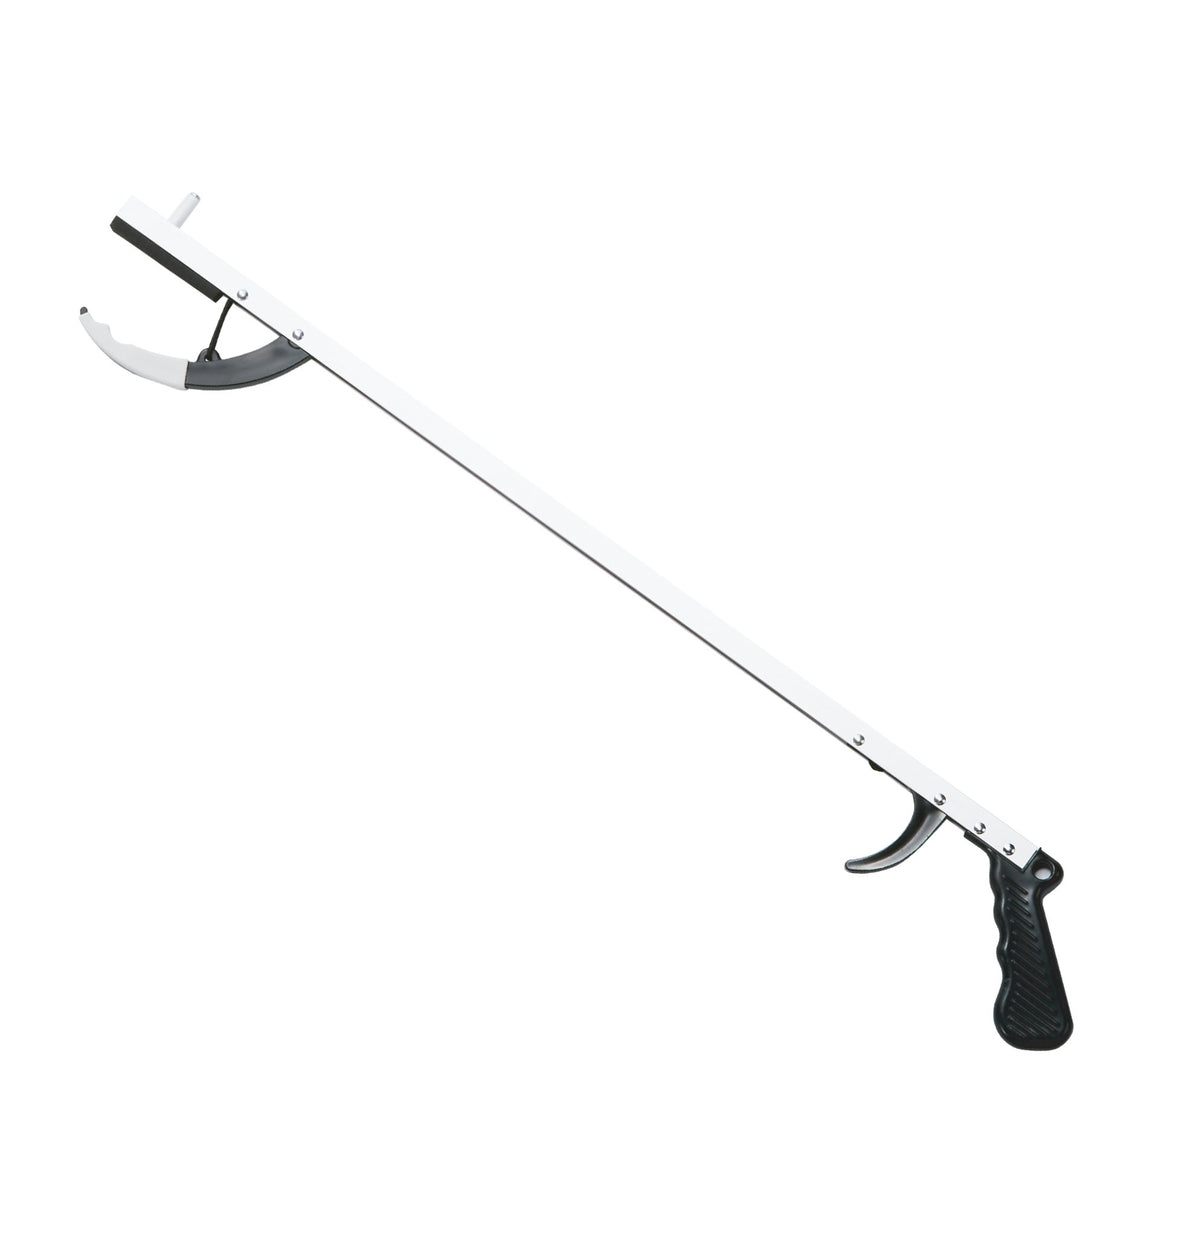 AHS 32 Inch Ultra Lightweight Claw-Style Reacher – Aluminum Reaching Tool with Non-Slip Pad - American Hospital Supply